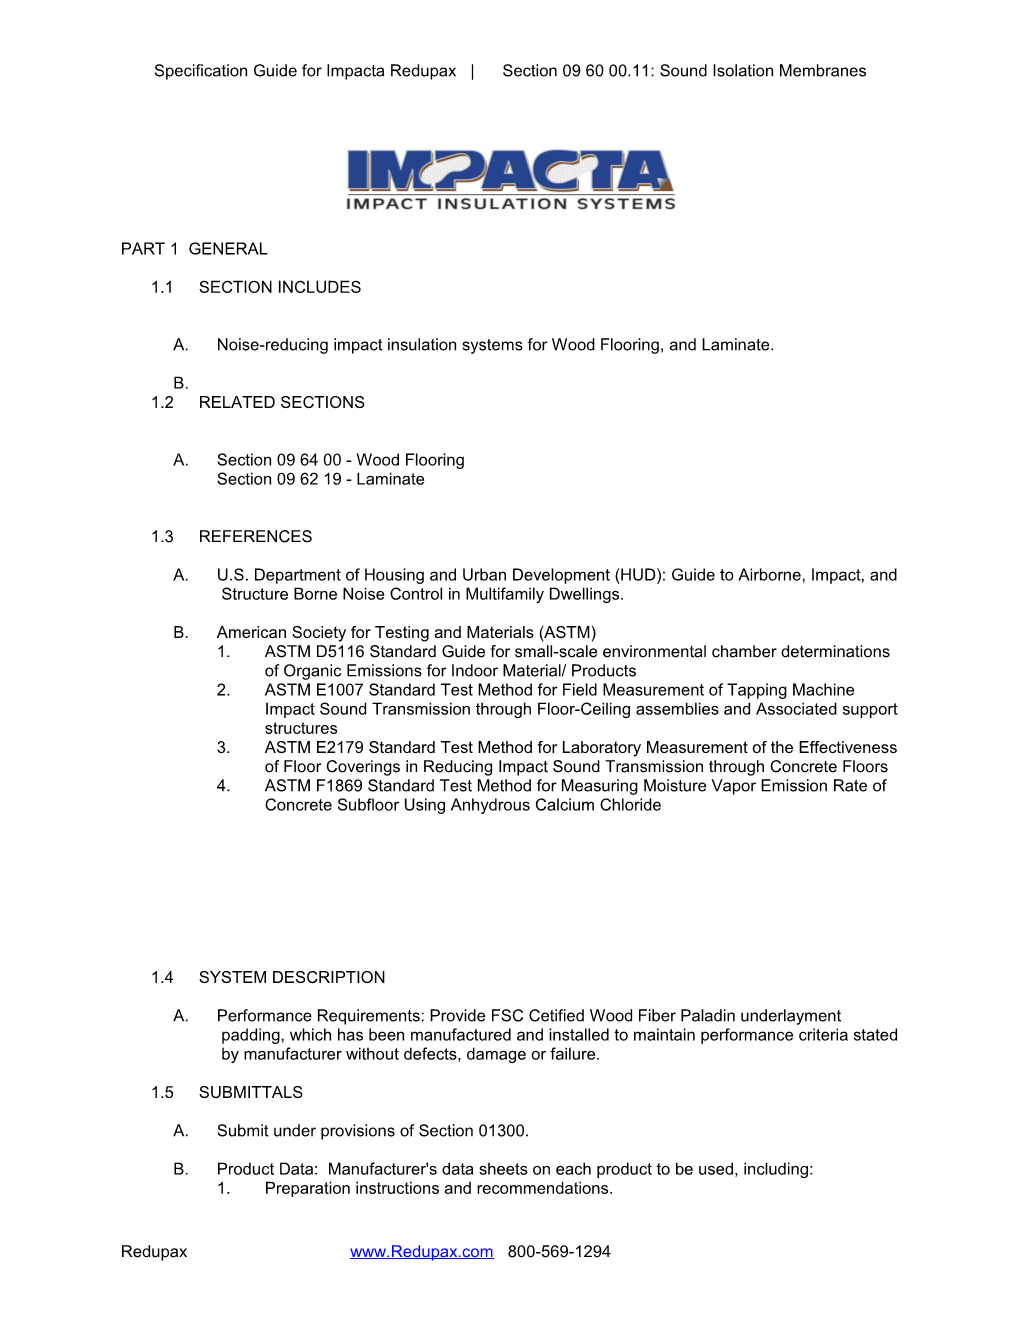 Specification Guide For Impacta-Regupol Probase | Section 09 60 00.11: Sound Isolation Membranes